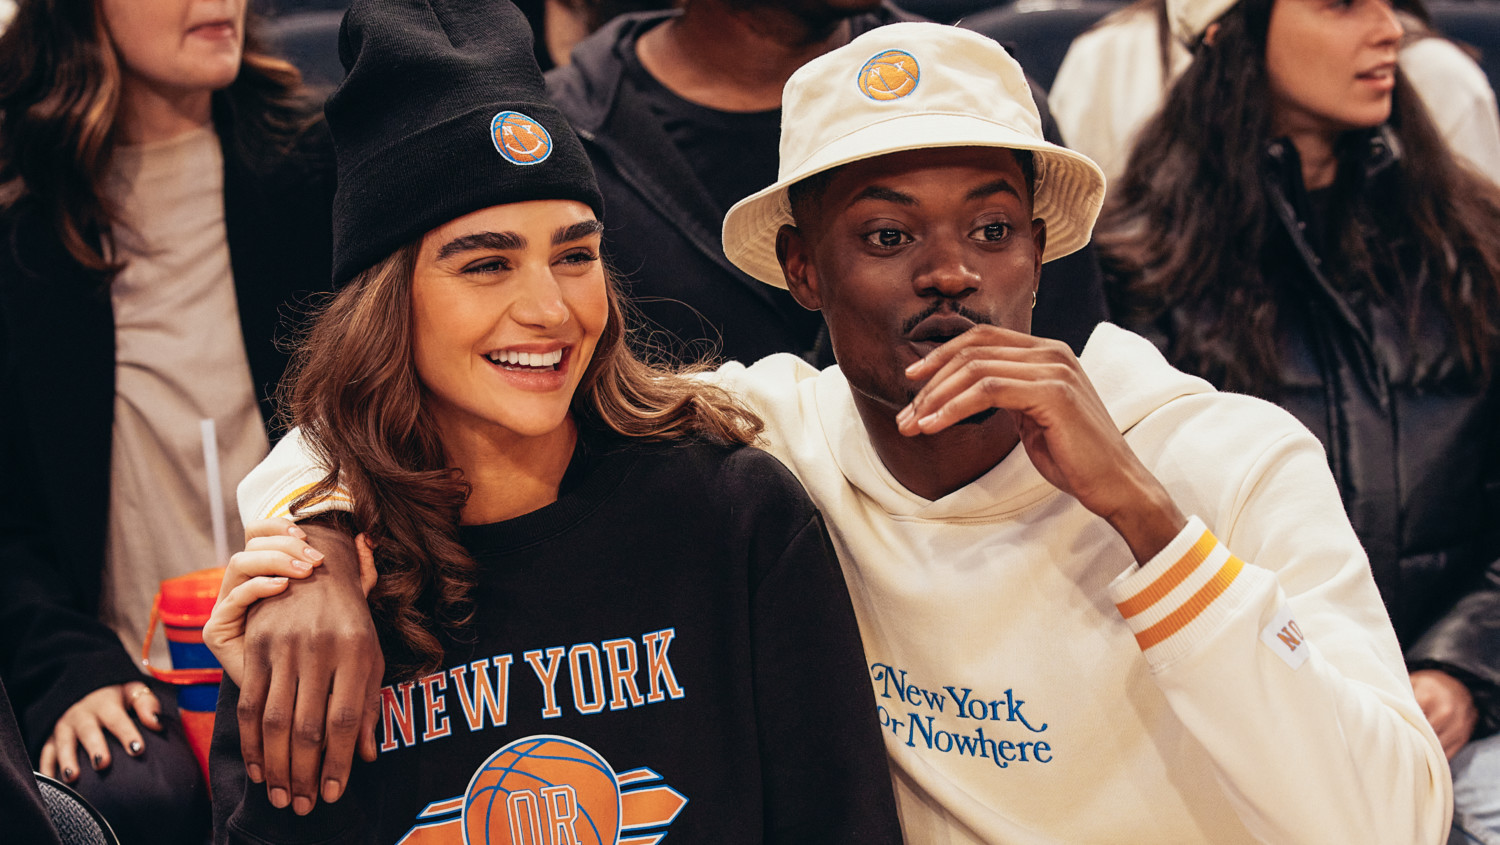 Is there anywhere we can get Gotham Knicks merch like this